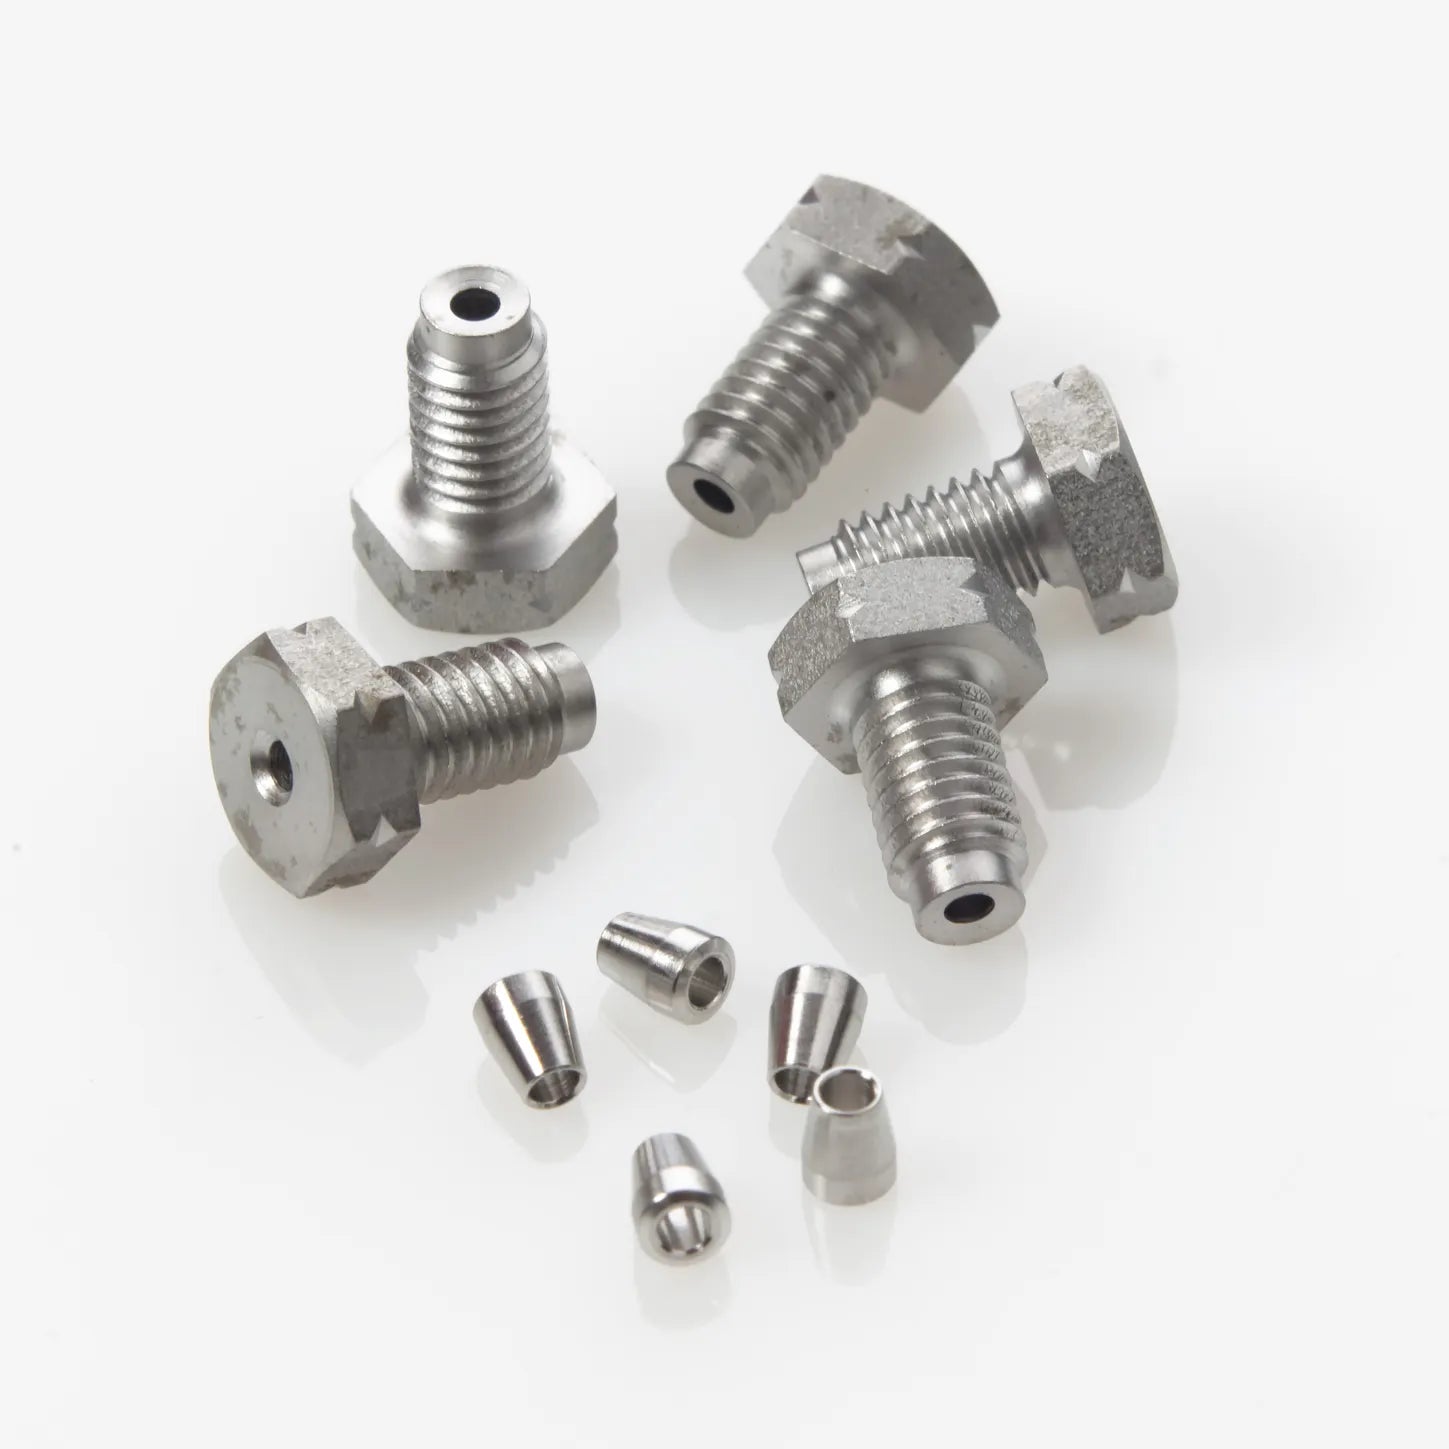 Compression Screws & Ferrules, 1/16", SS, 5/pk, Comparable to OEM # WAT025604